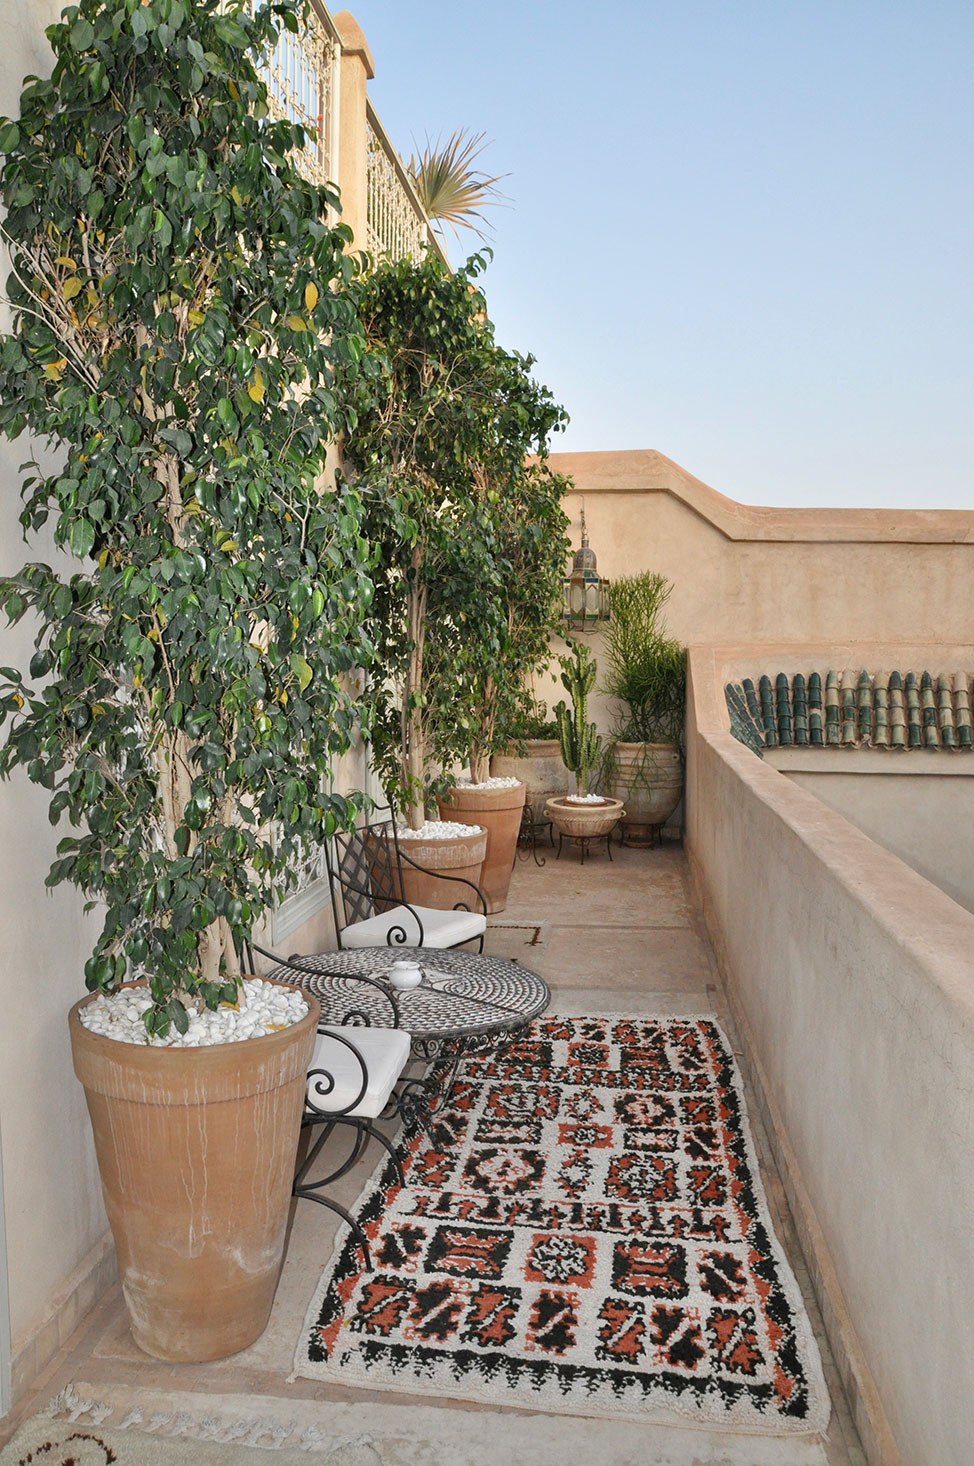 Outdoor seating area at with potted plants, Moroccan rug and wrought iron furniture.